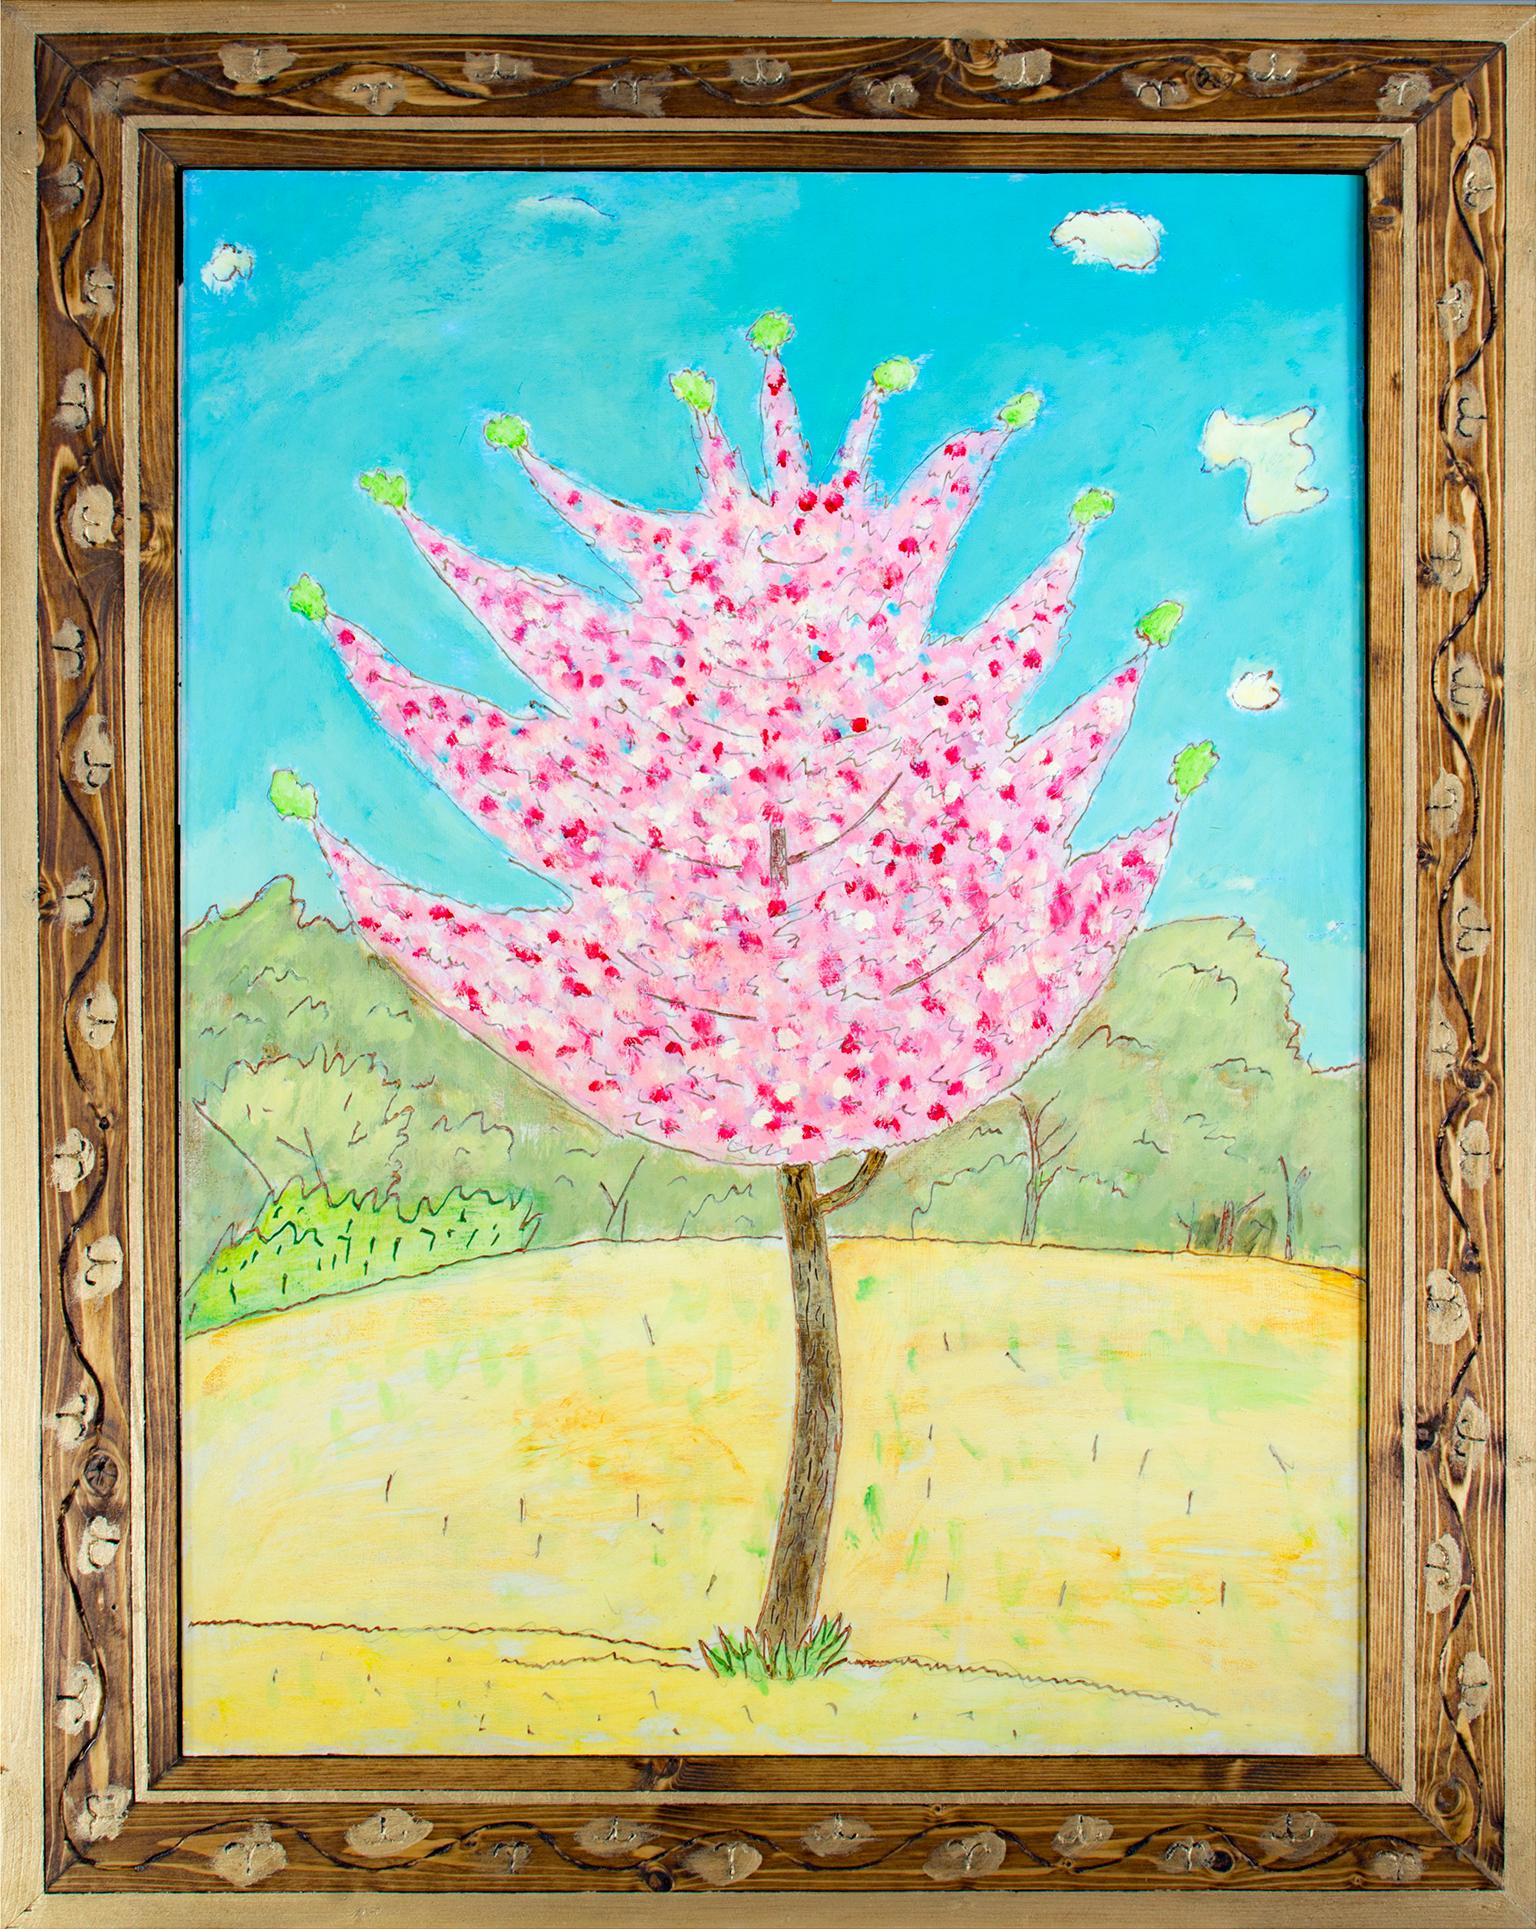 "New Growth" is an original oil painting on wood by Wisconsin artist Robert Richter, signed on the verso. The frame was hand-carved and painted by the artist, making it an integral piece of the artwork. Richter brings vibrant pinks, unusual in his